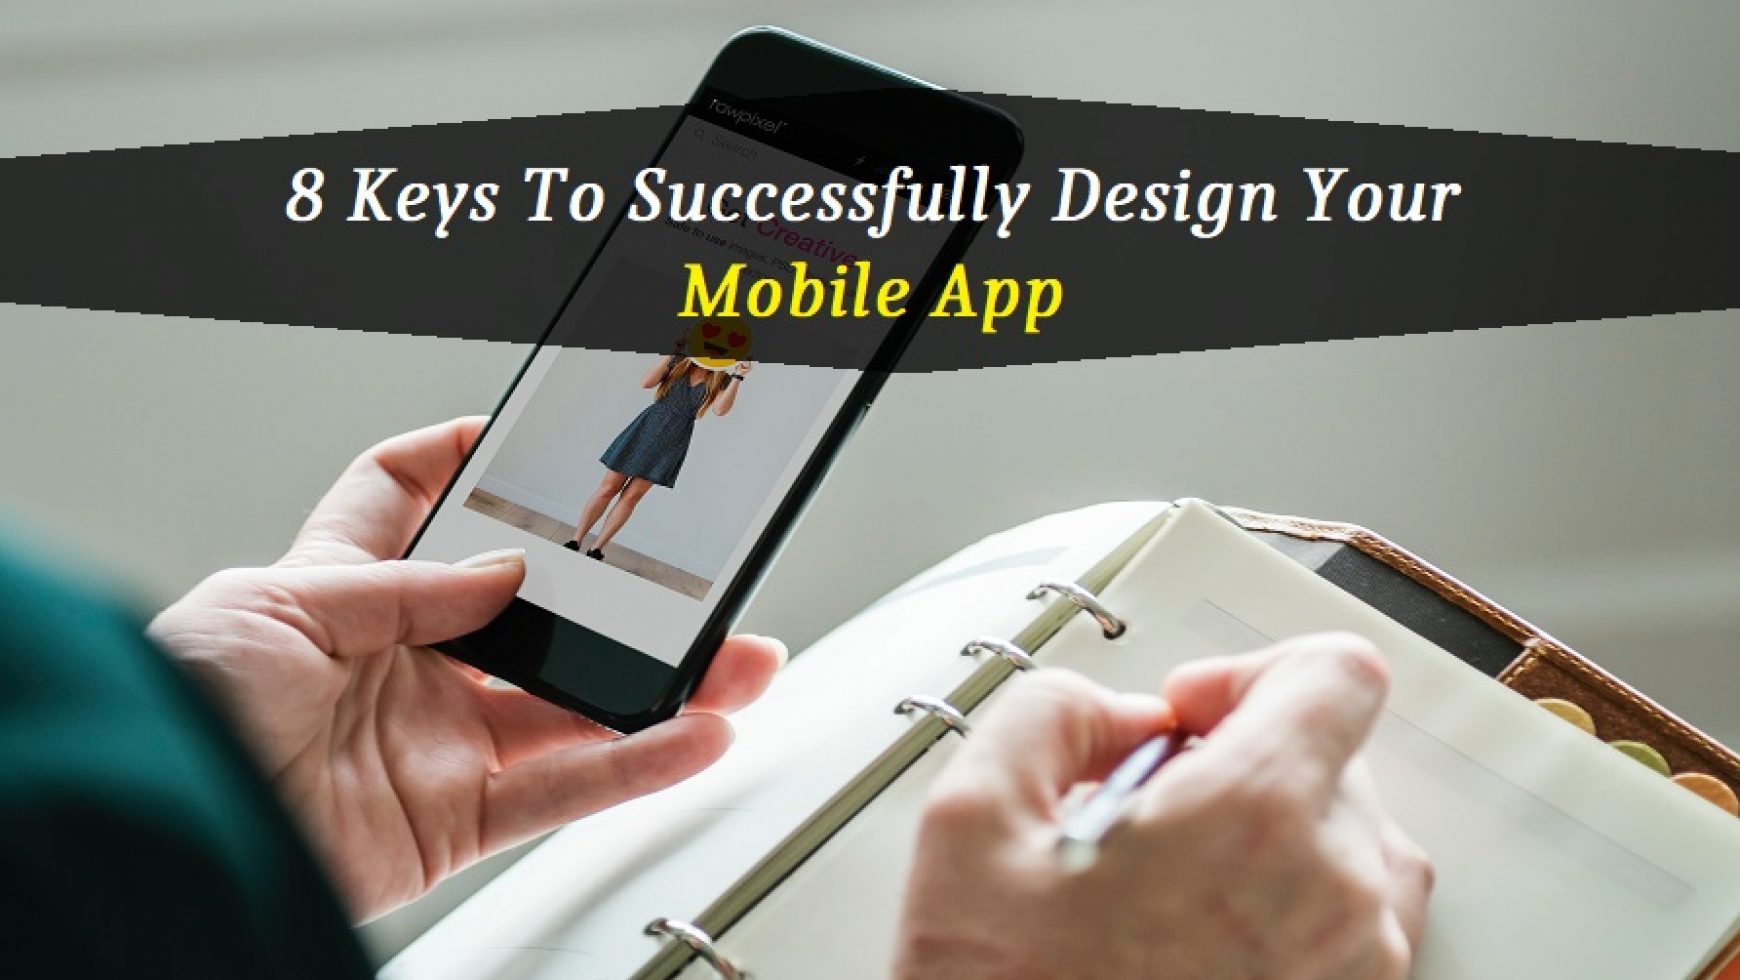 8 Keys To Successfully Design Your Mobile App